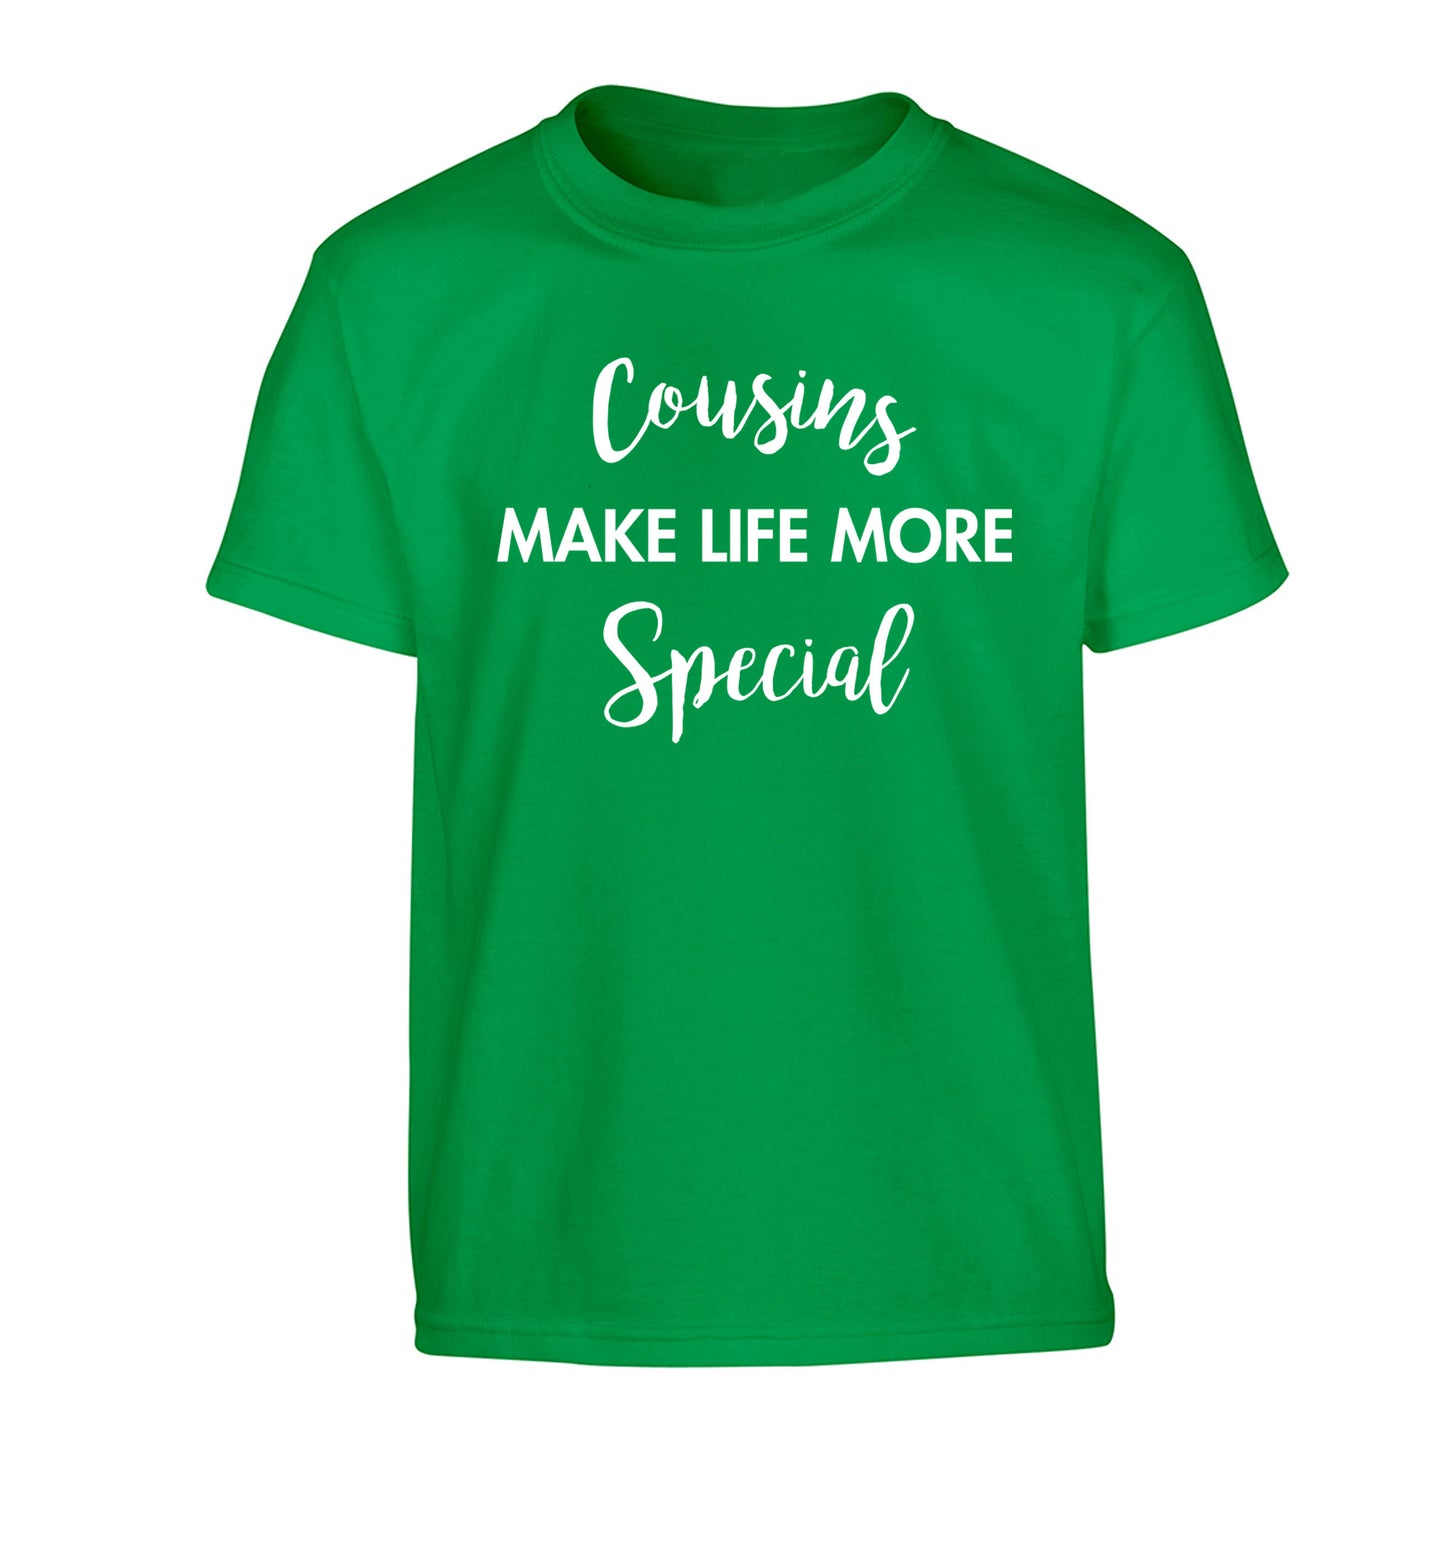 Cousins make life more special Children's green Tshirt 12-14 Years